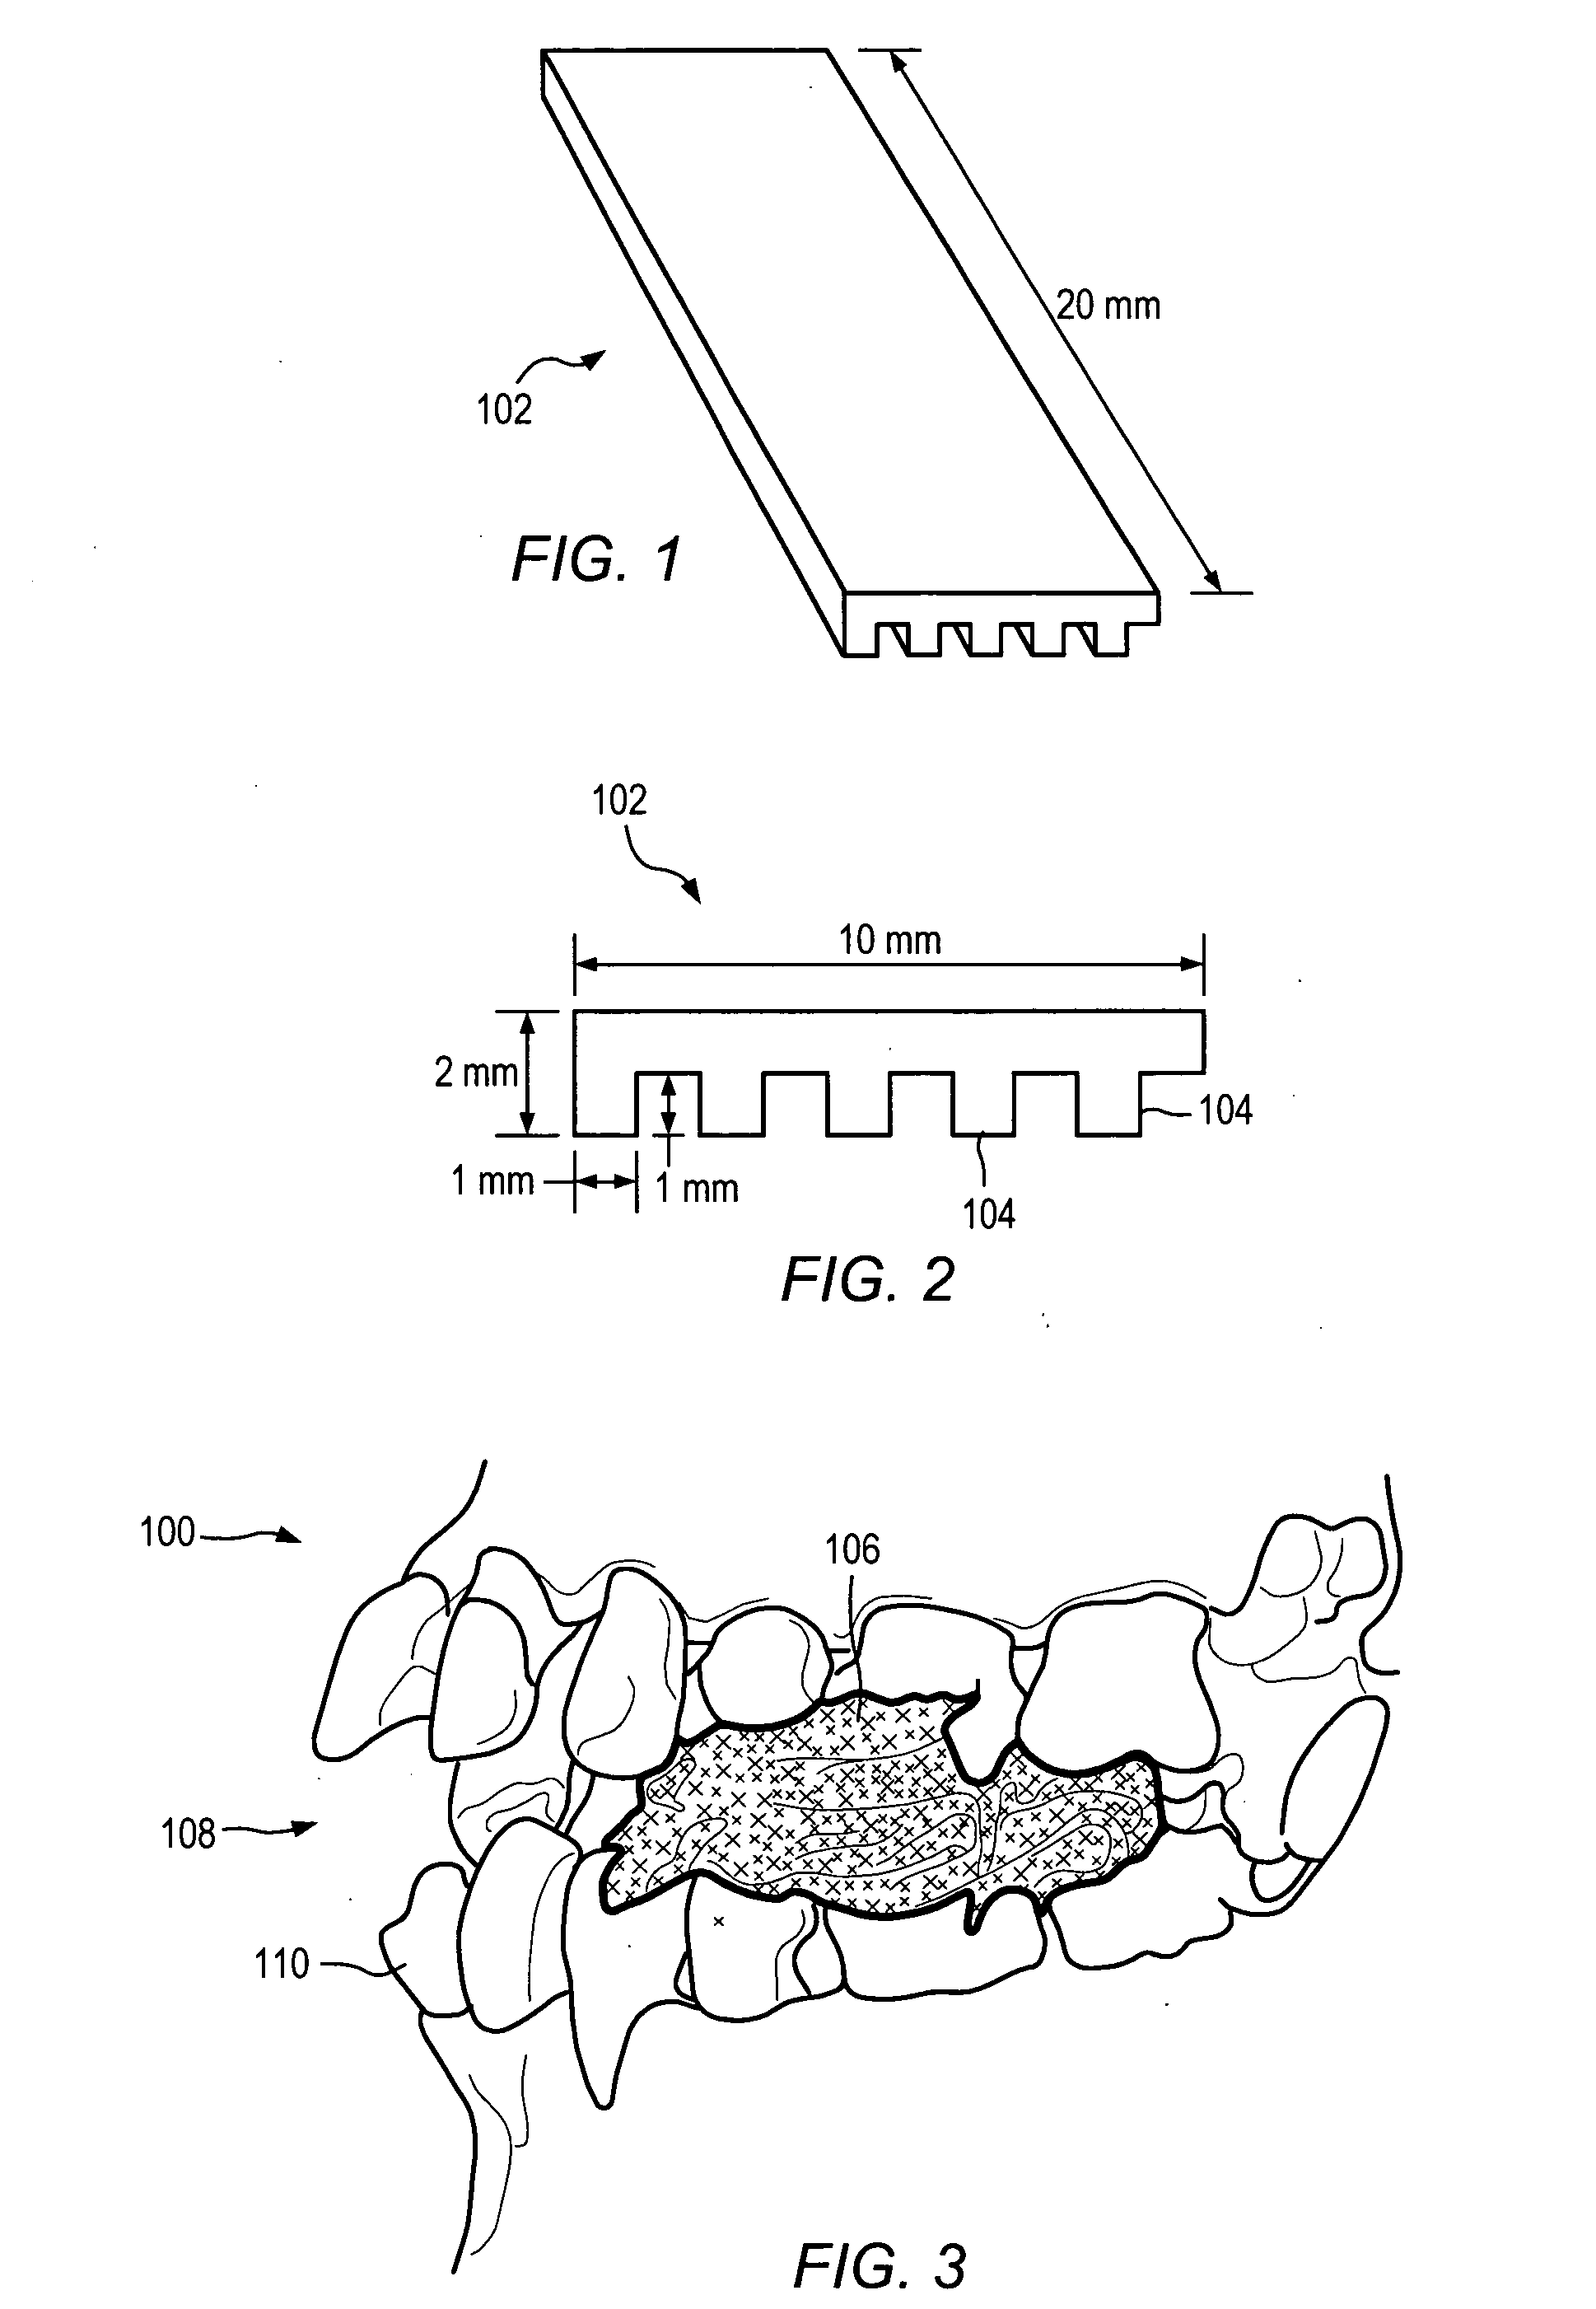 Anatomically-referenced fiducial marker for registration of data